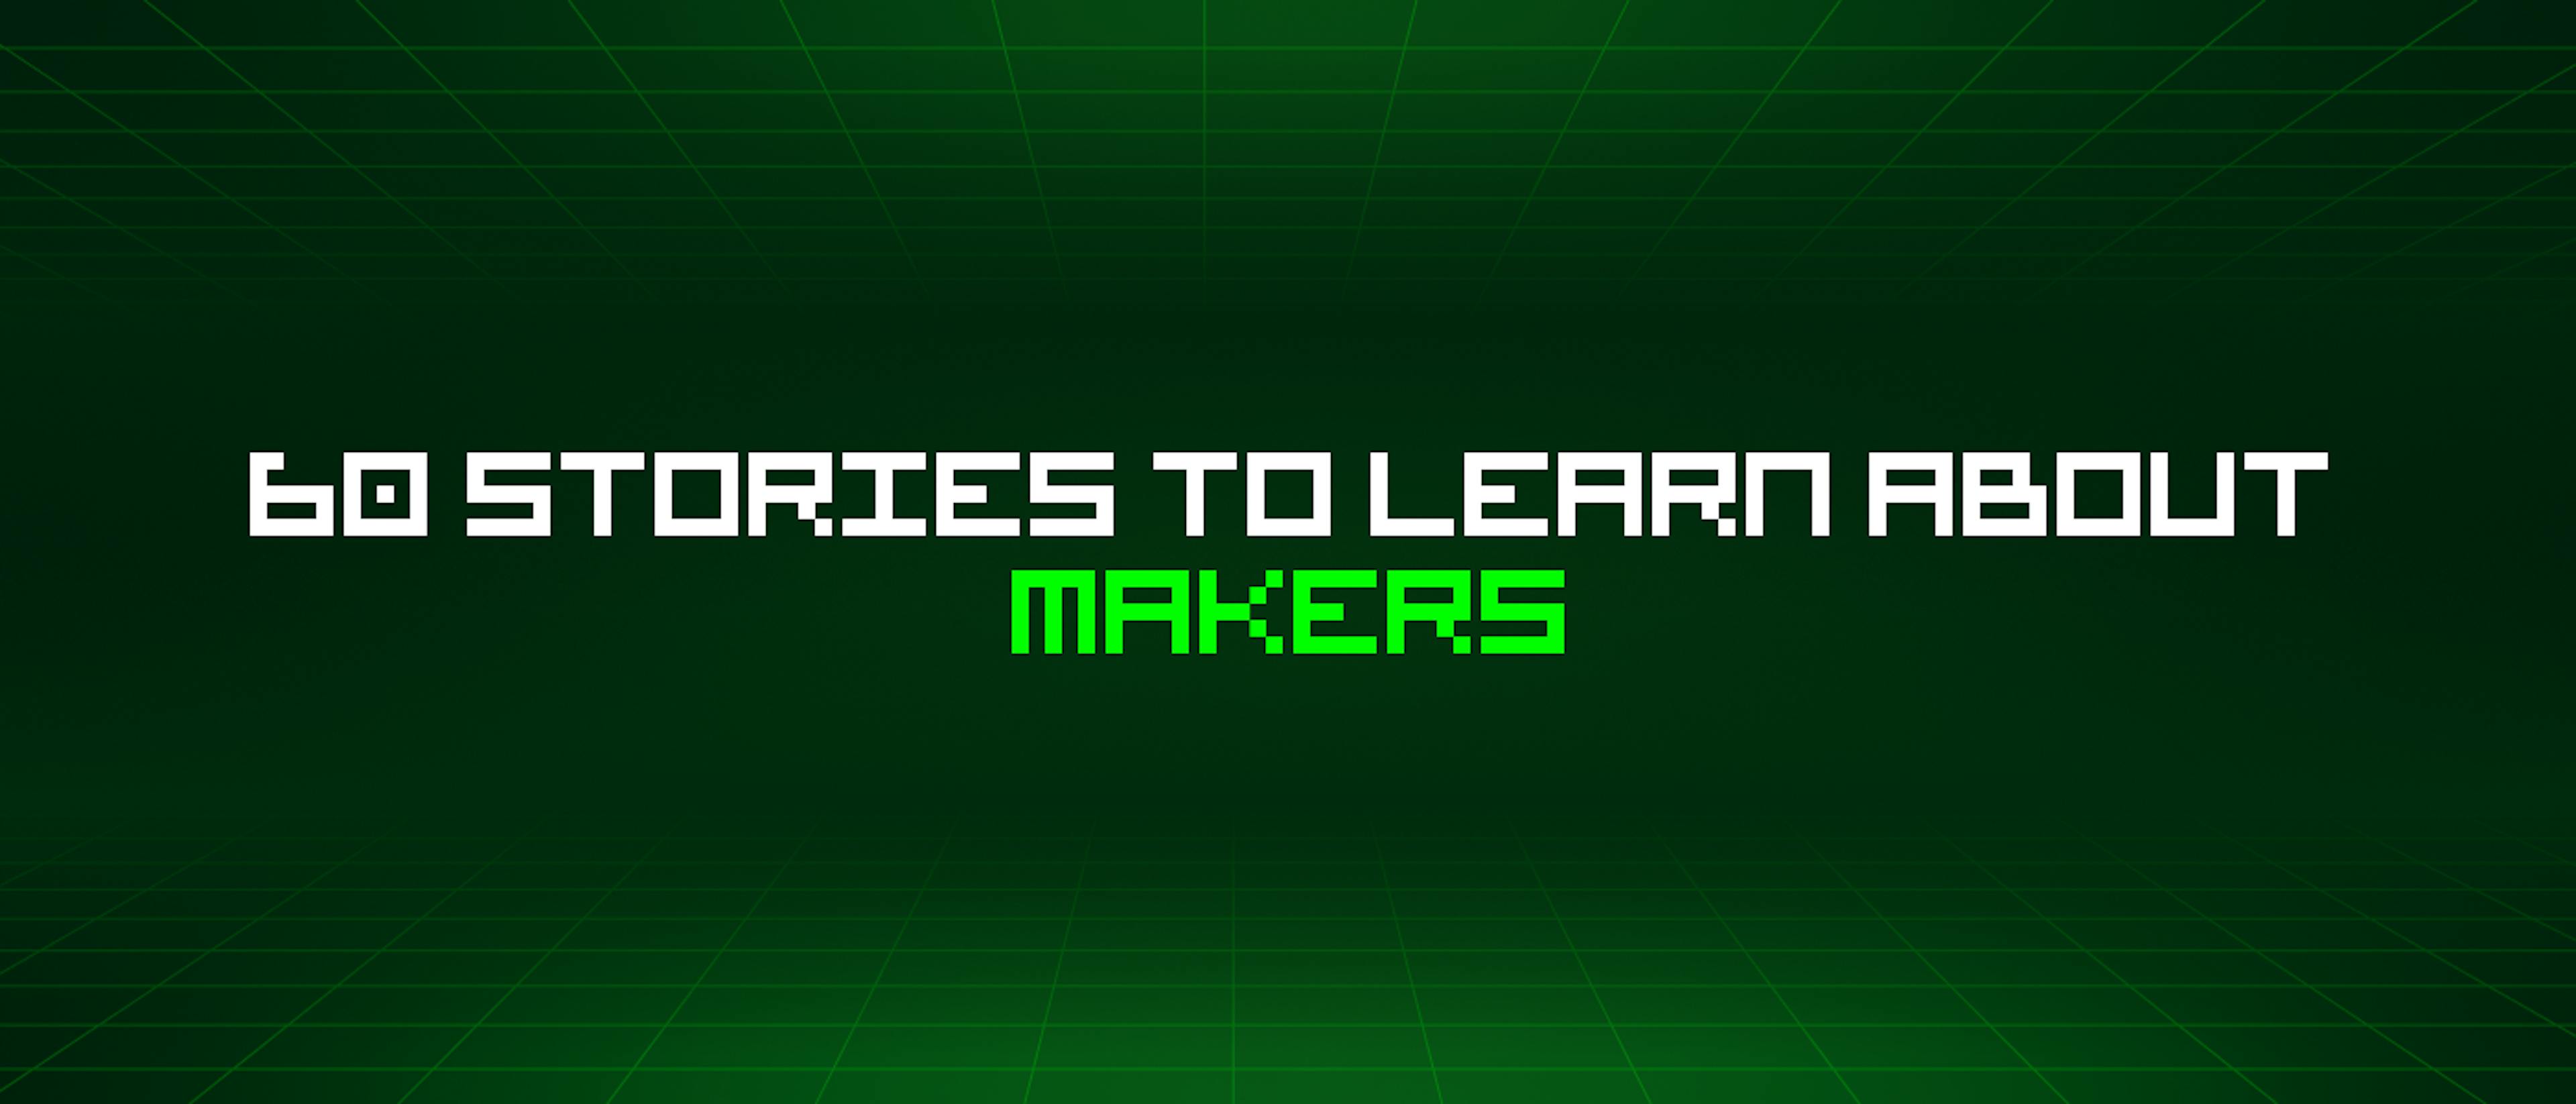 featured image - 60 Stories To Learn About Makers